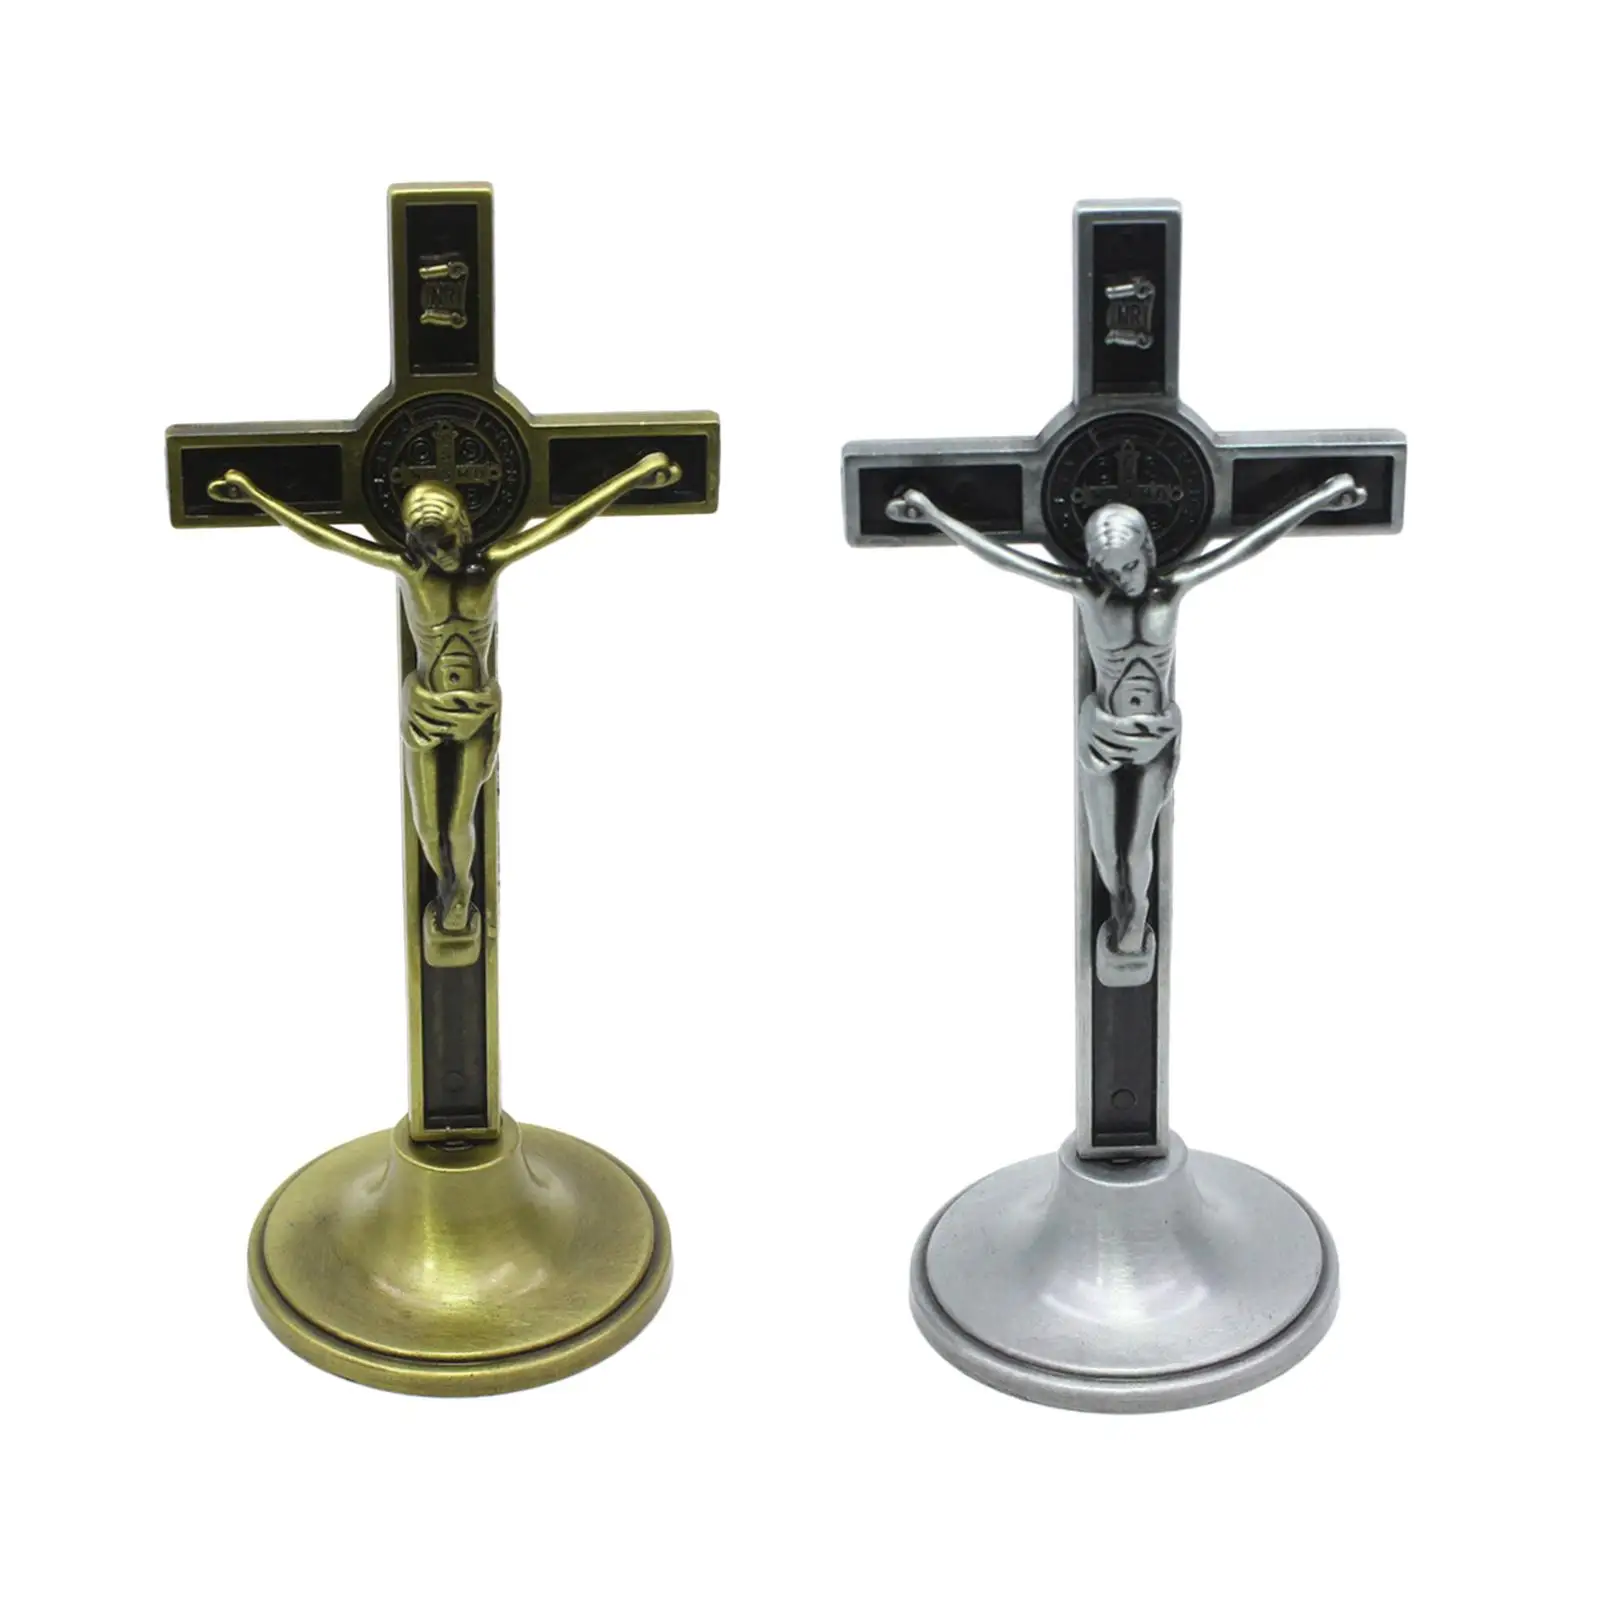 Standing Cross Crucifix Jesus with Stand Religious Craftsmanship Durable Decor Alloy Christ Holy Land Ornaments for Desk Table